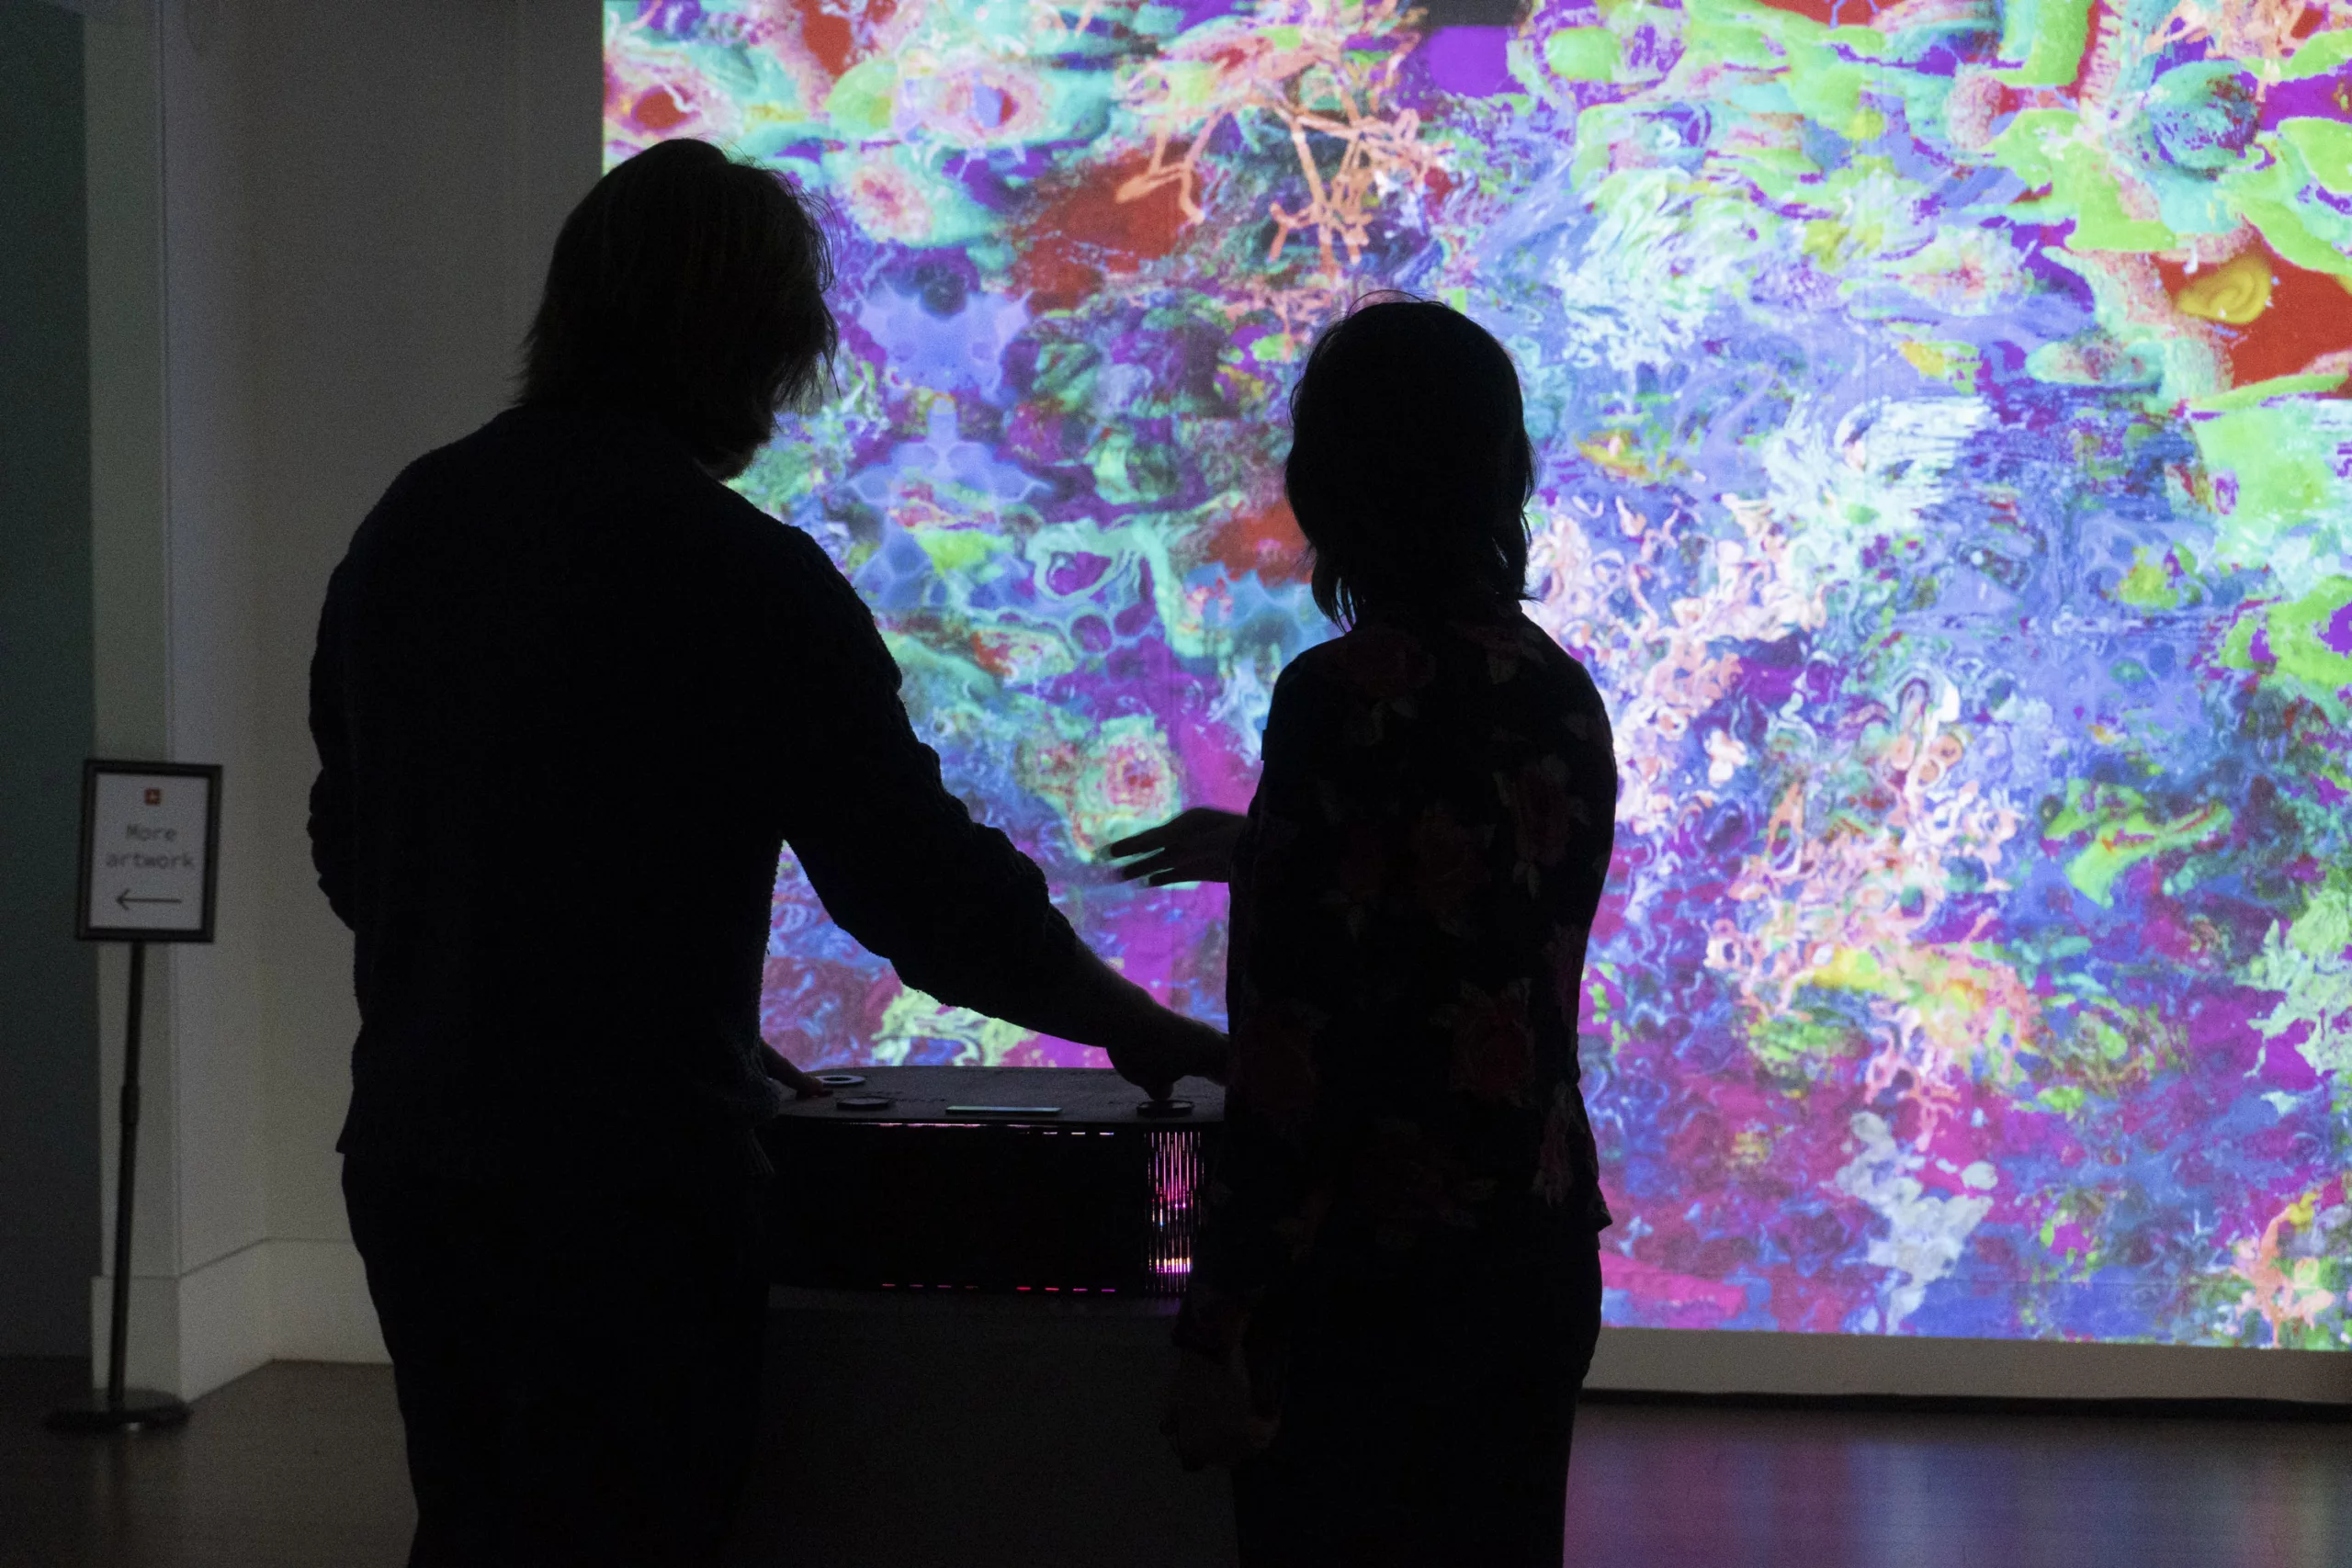 Abstract, swirling colors are projected onto a wall. The silhouettes of two people can be seen in front of the projection. They are standing by a rounded box with touch sensor controls.